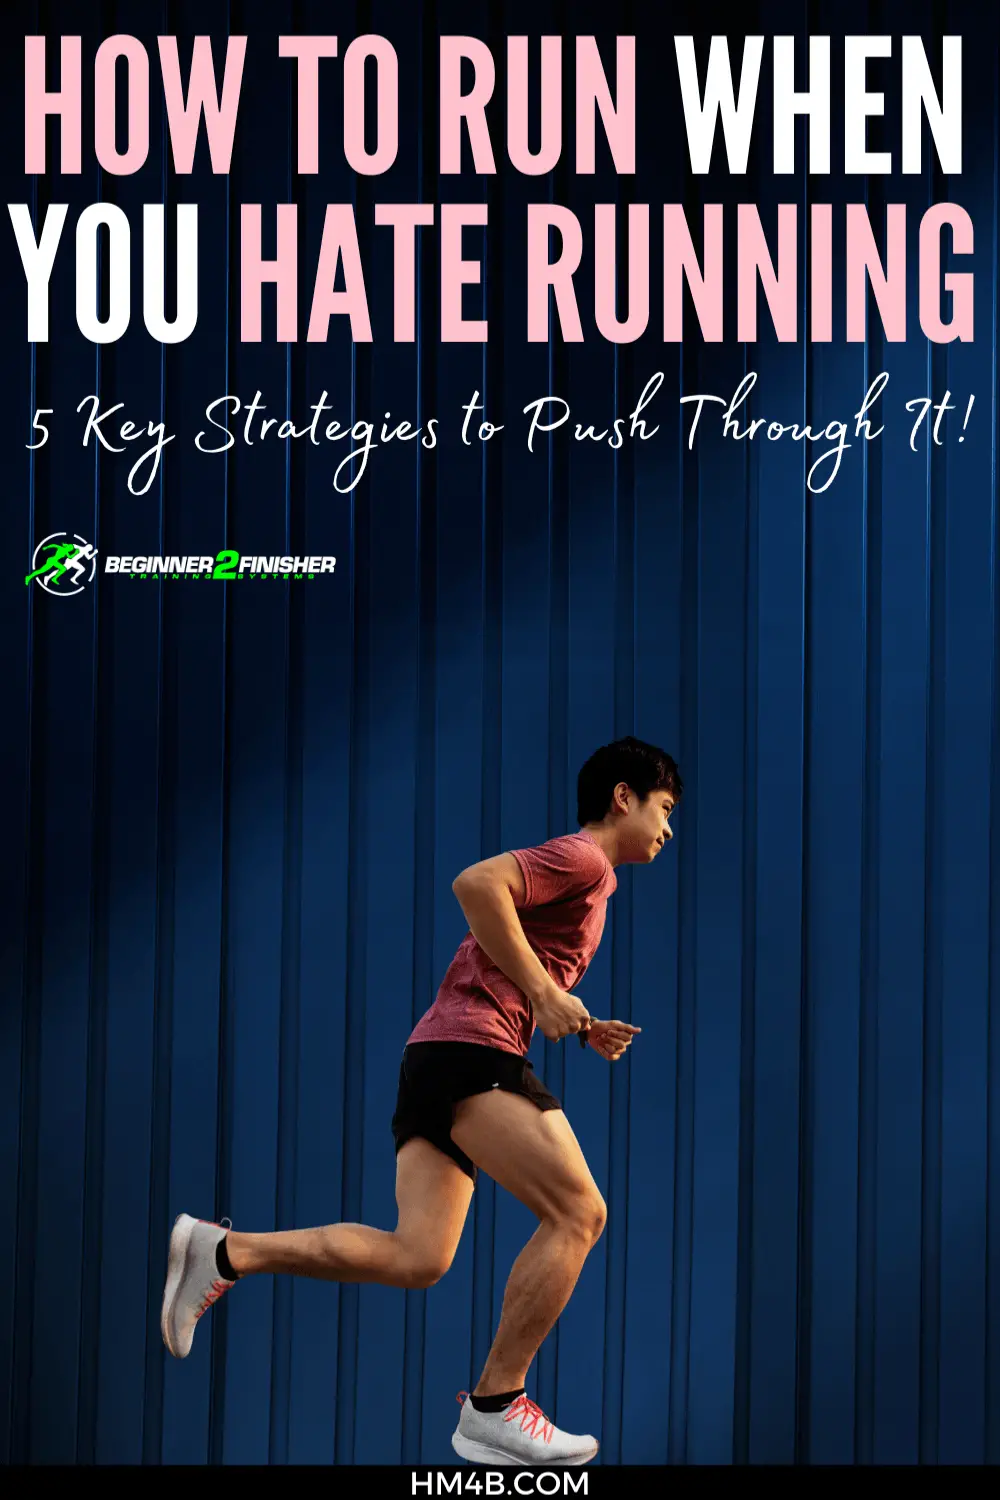 How to Run When You Hate Running - 5 key strategies to push through it!